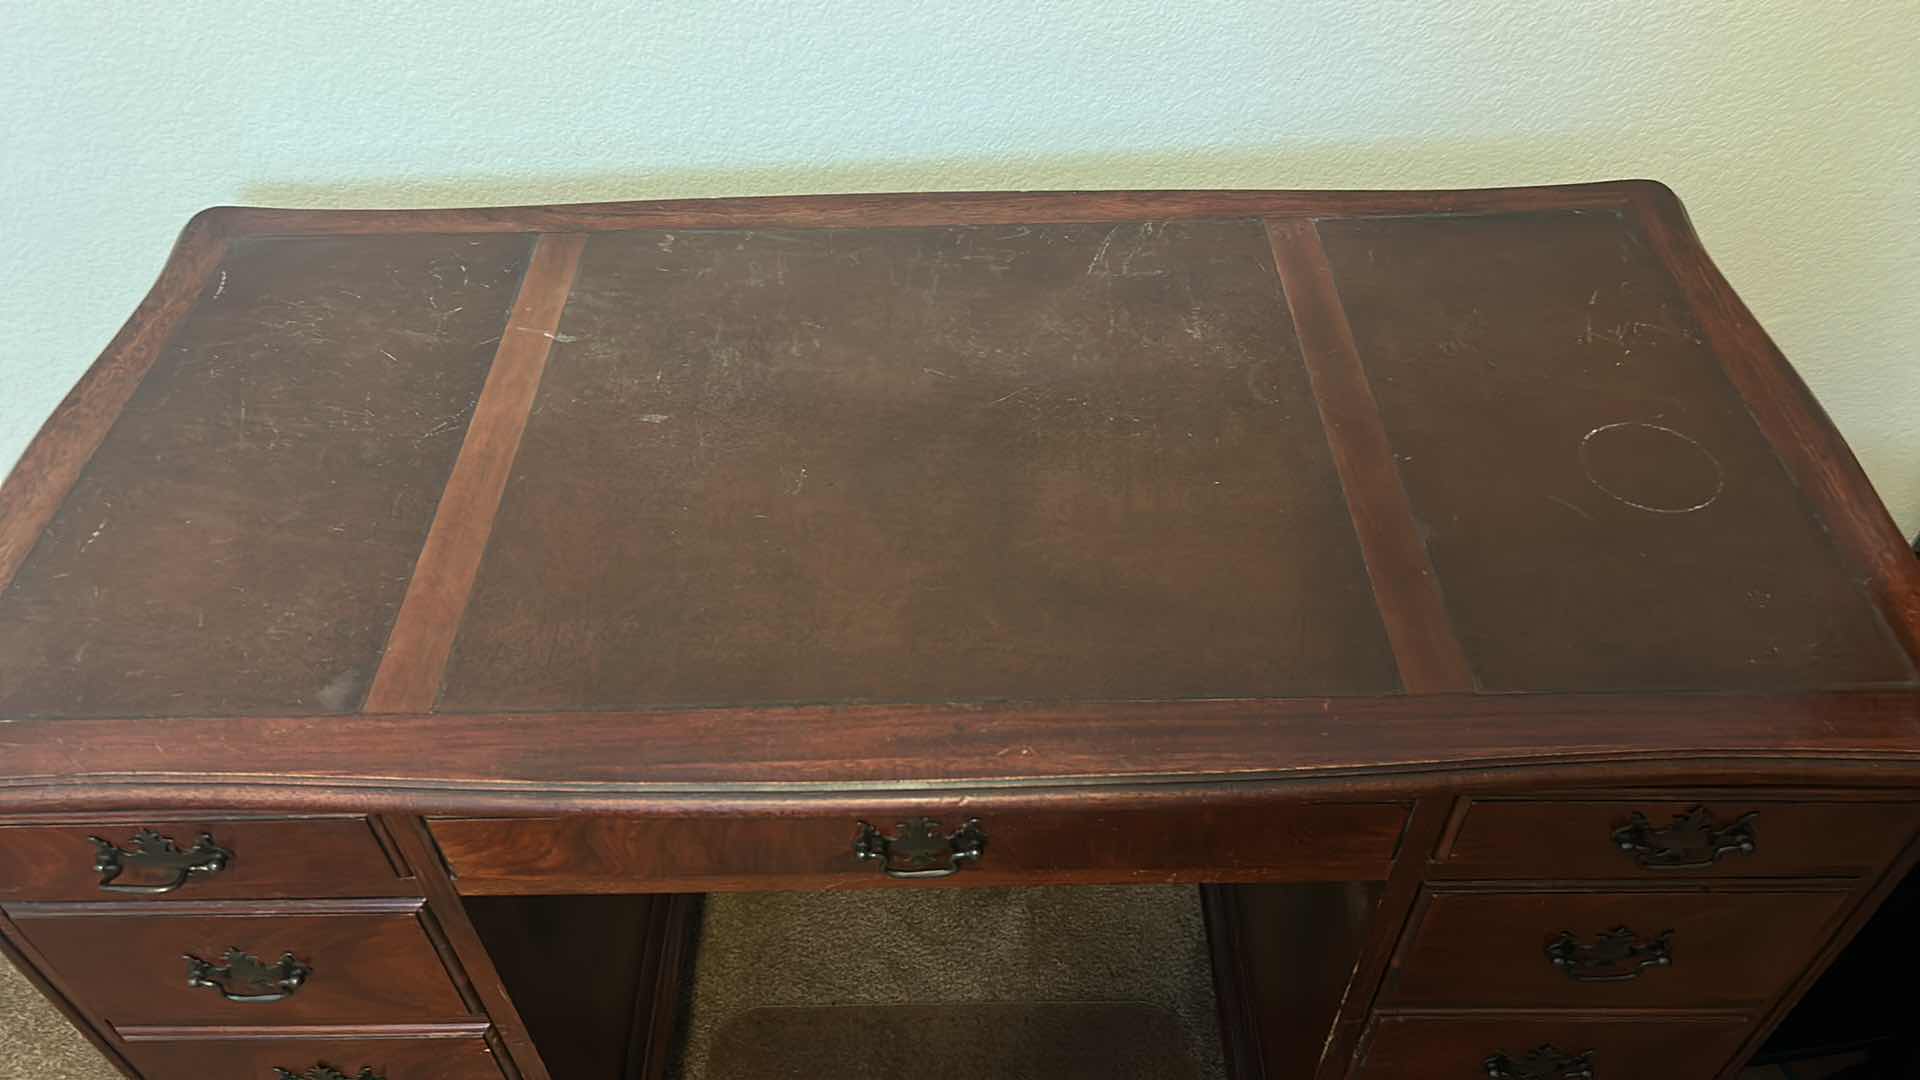 Photo 4 of VINTAGE WOOD LEATHER TOP DESK, OFFICE CHAIR AND MATT 48” x 24” x H29”